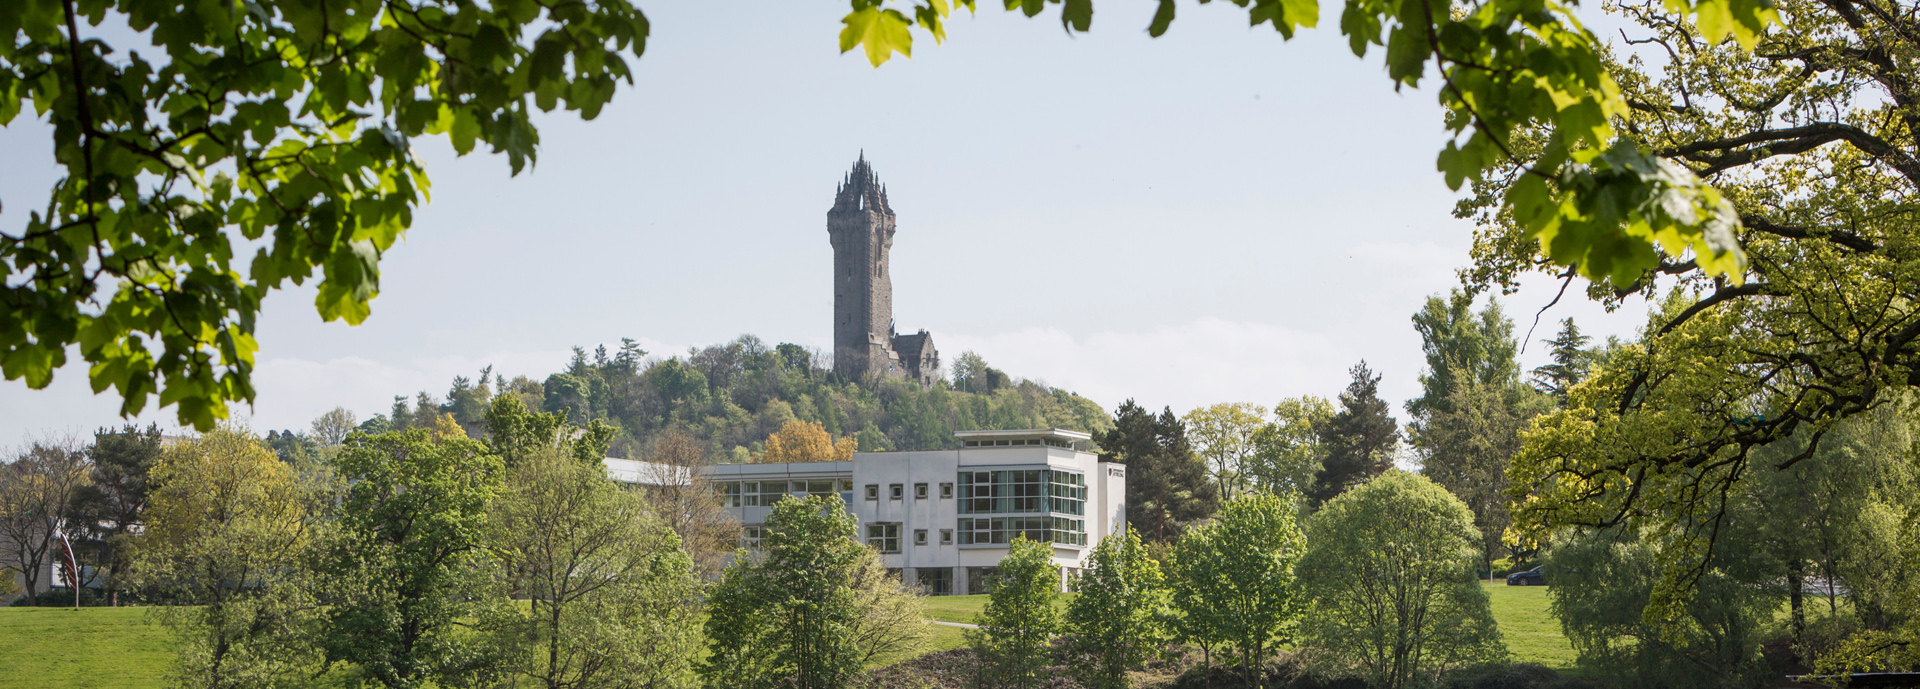 university campus wallace monument